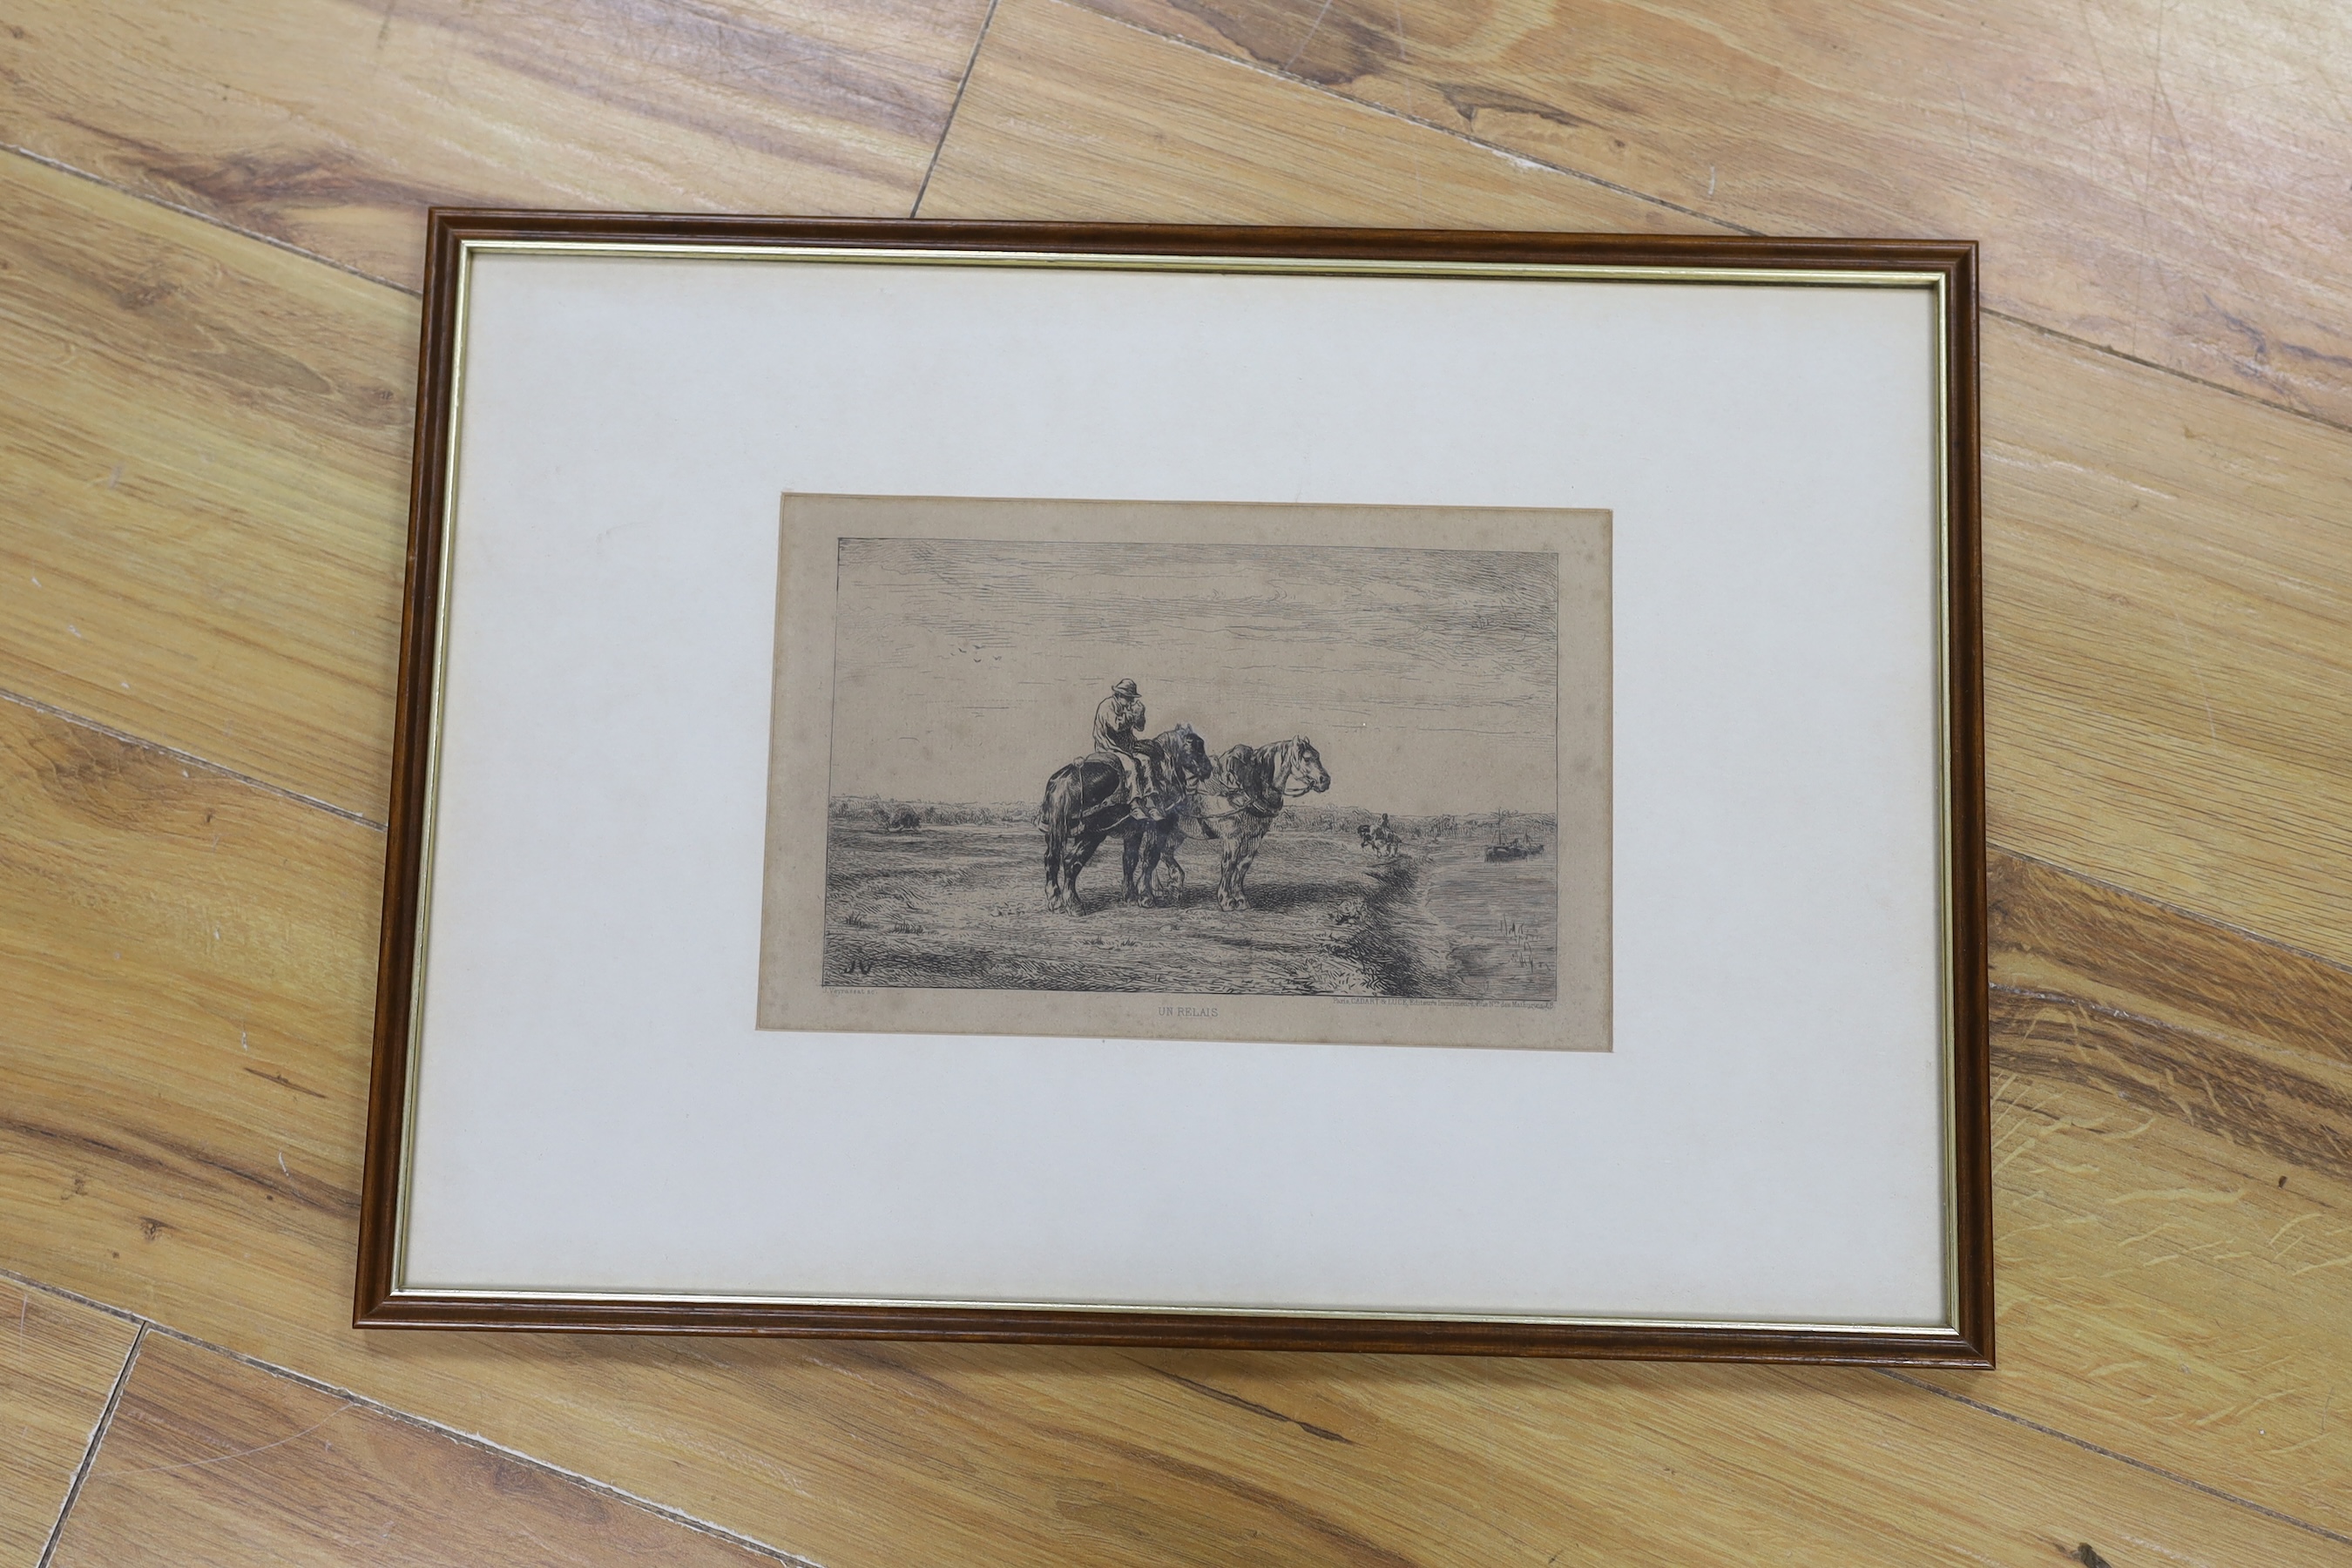 J. Veyrassat after Rosa Bonheur (French, 1822-1899), drypoint etching, 'Un Relais', figure with two horses, signed in pencil, 13.5 x 22cm